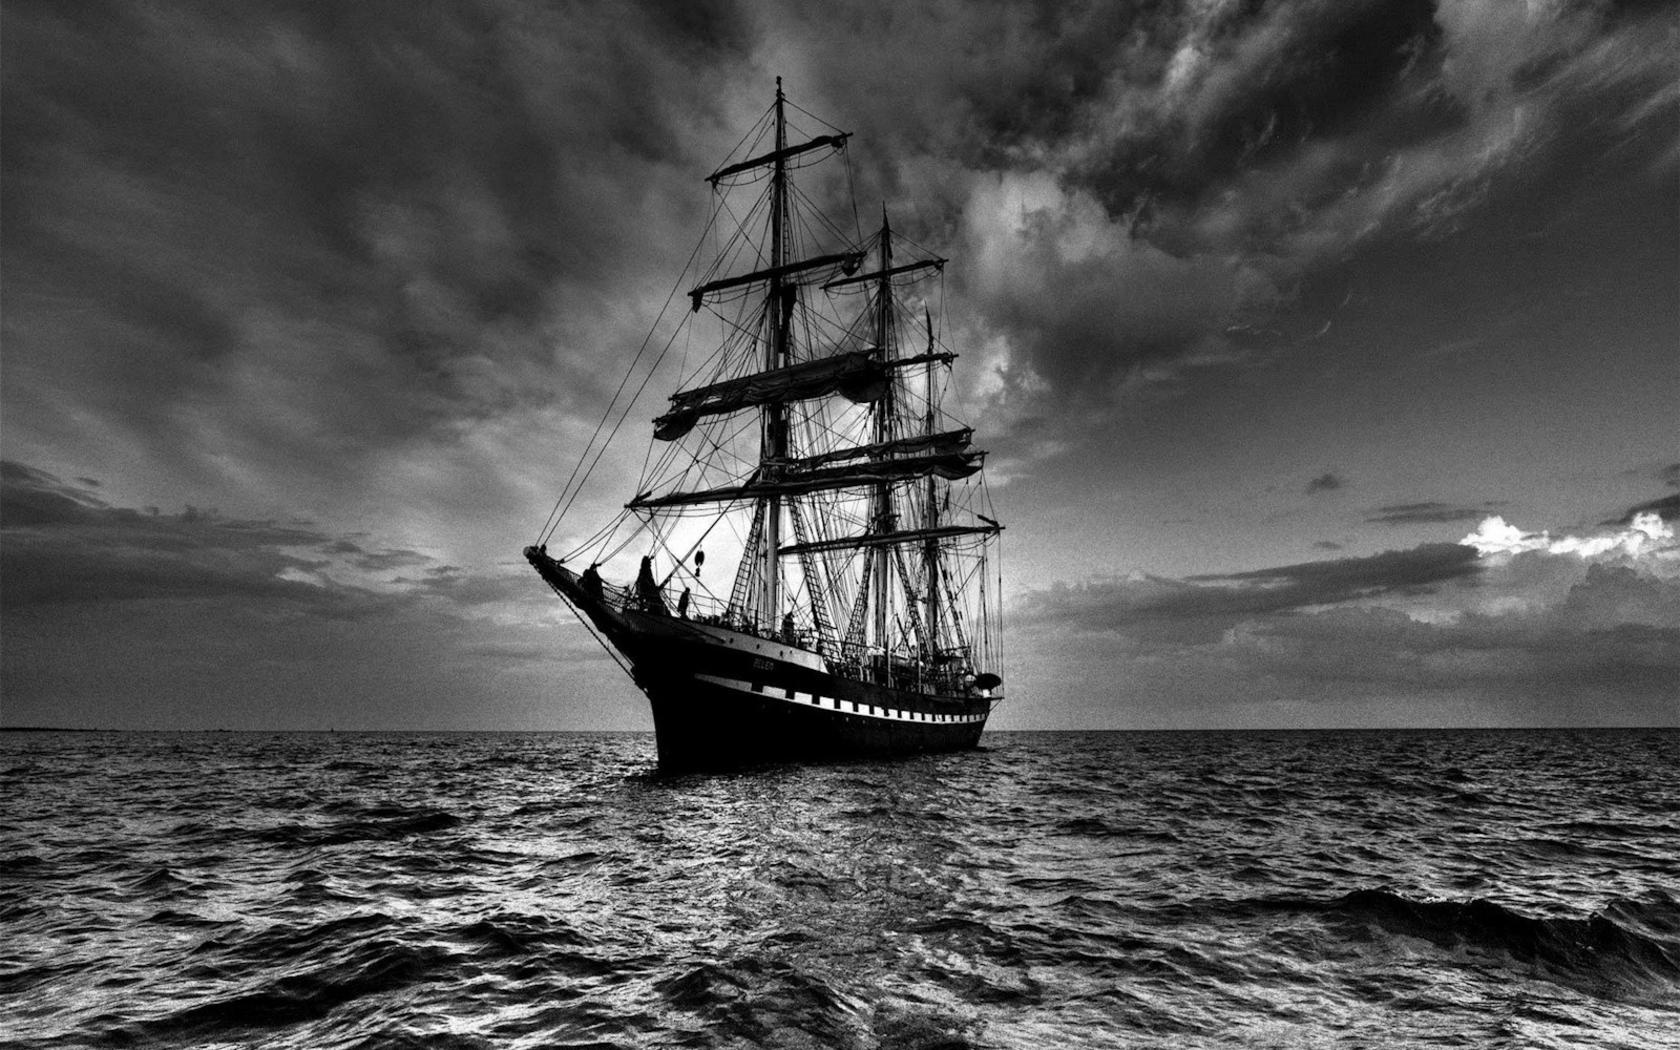 Saling Ship in the Middle of Stormy Ocean | Photo and Desktop ...